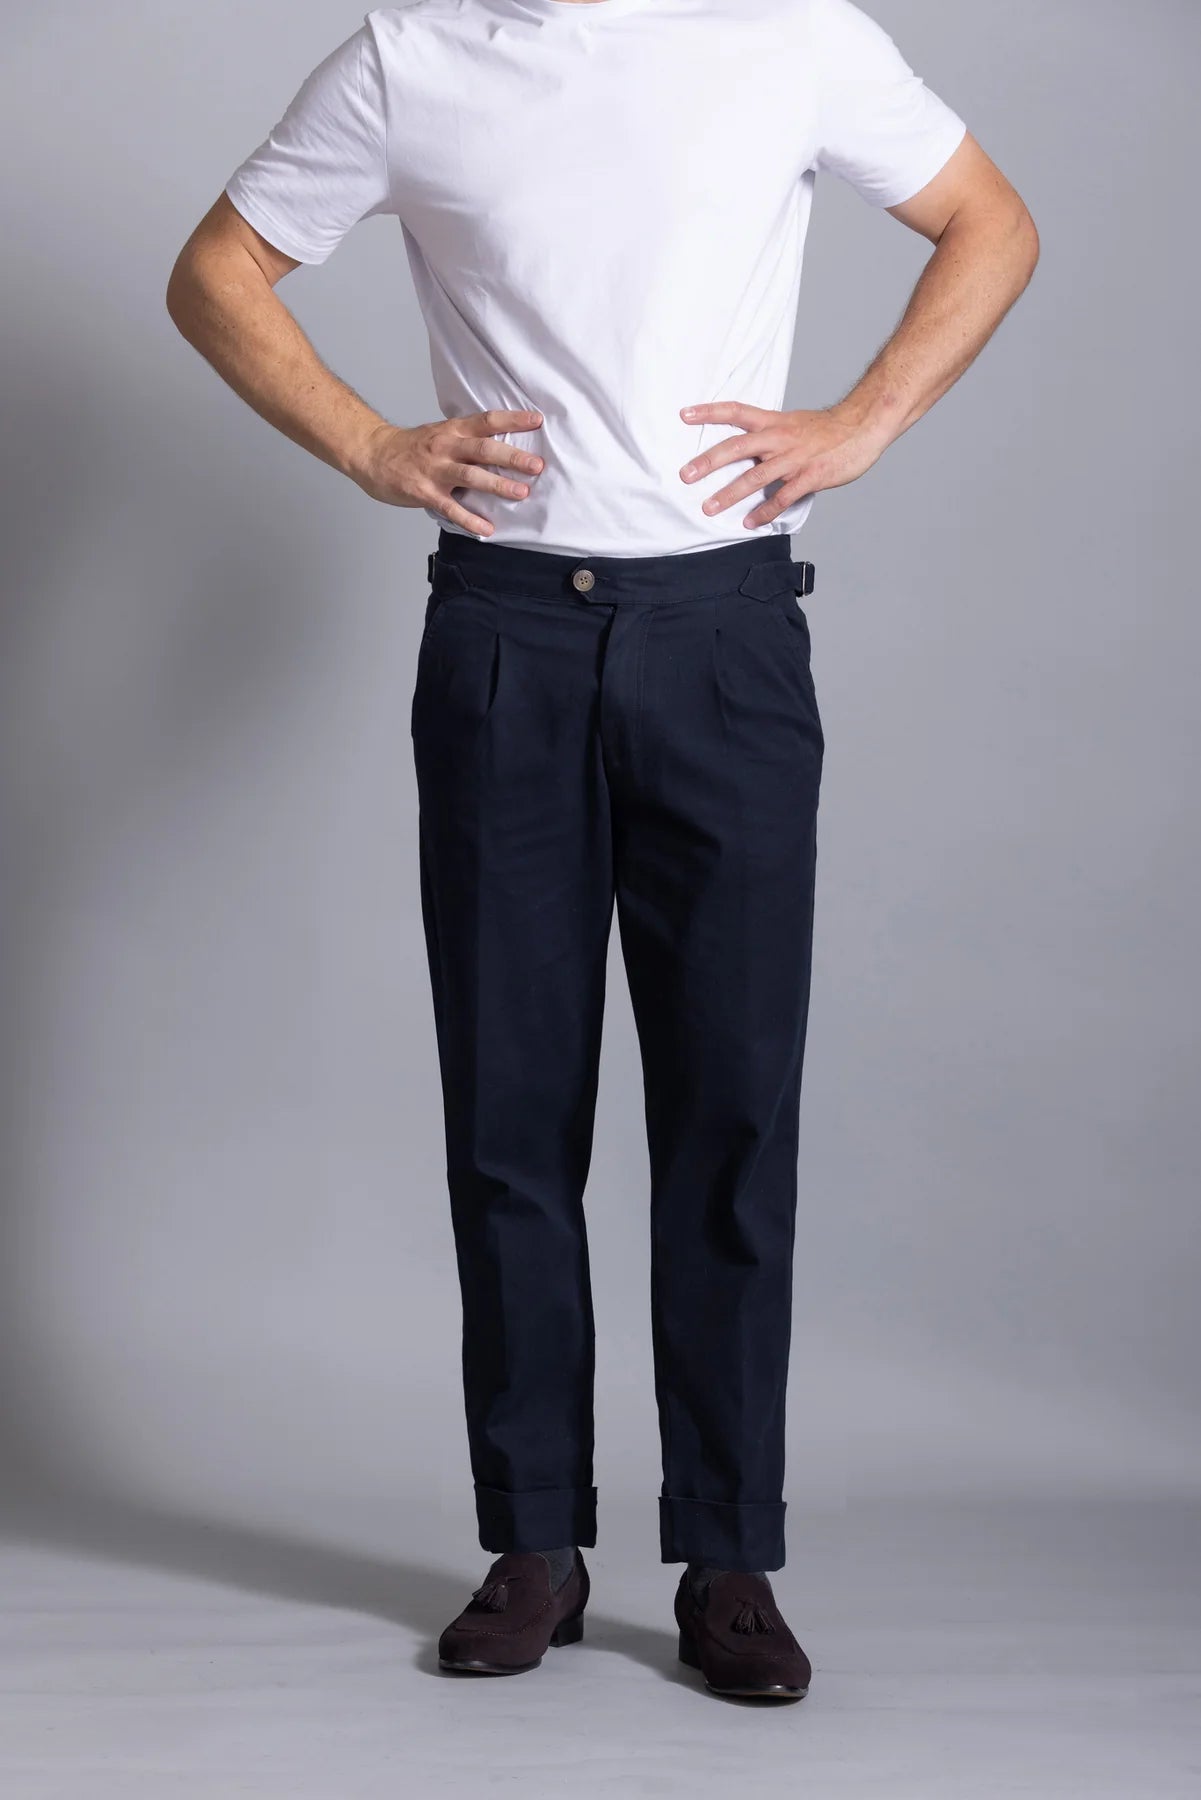 Cutler &amp; Co Iggy Trousers | Thunderstorm